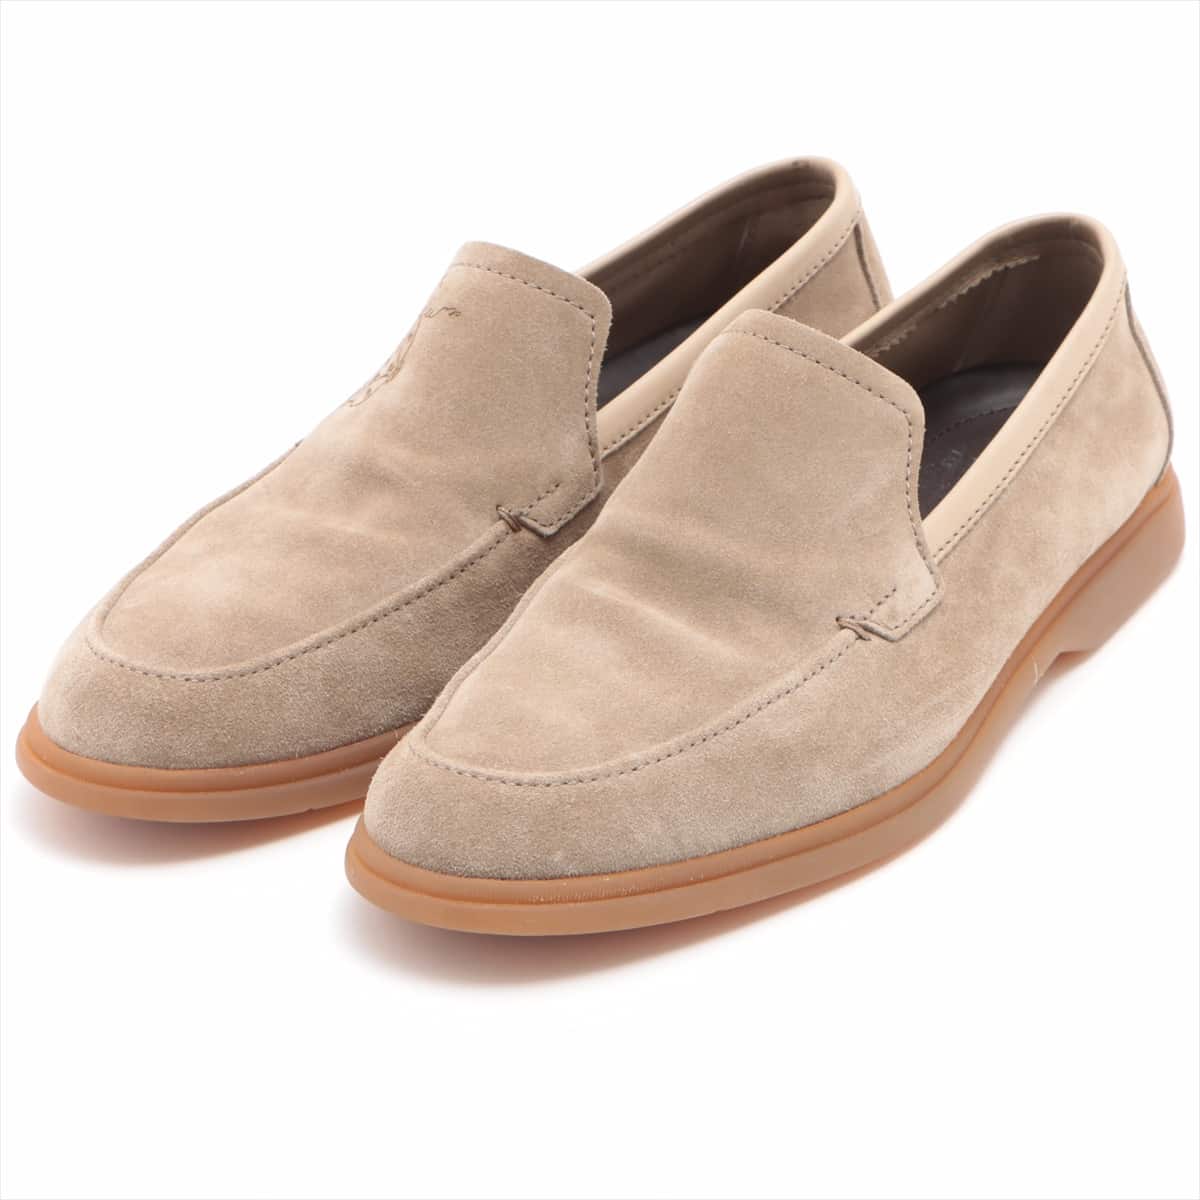 Berluti Calligraphy Suede Slip-on 7 Men's Beige Comes with genuine shoe keeper